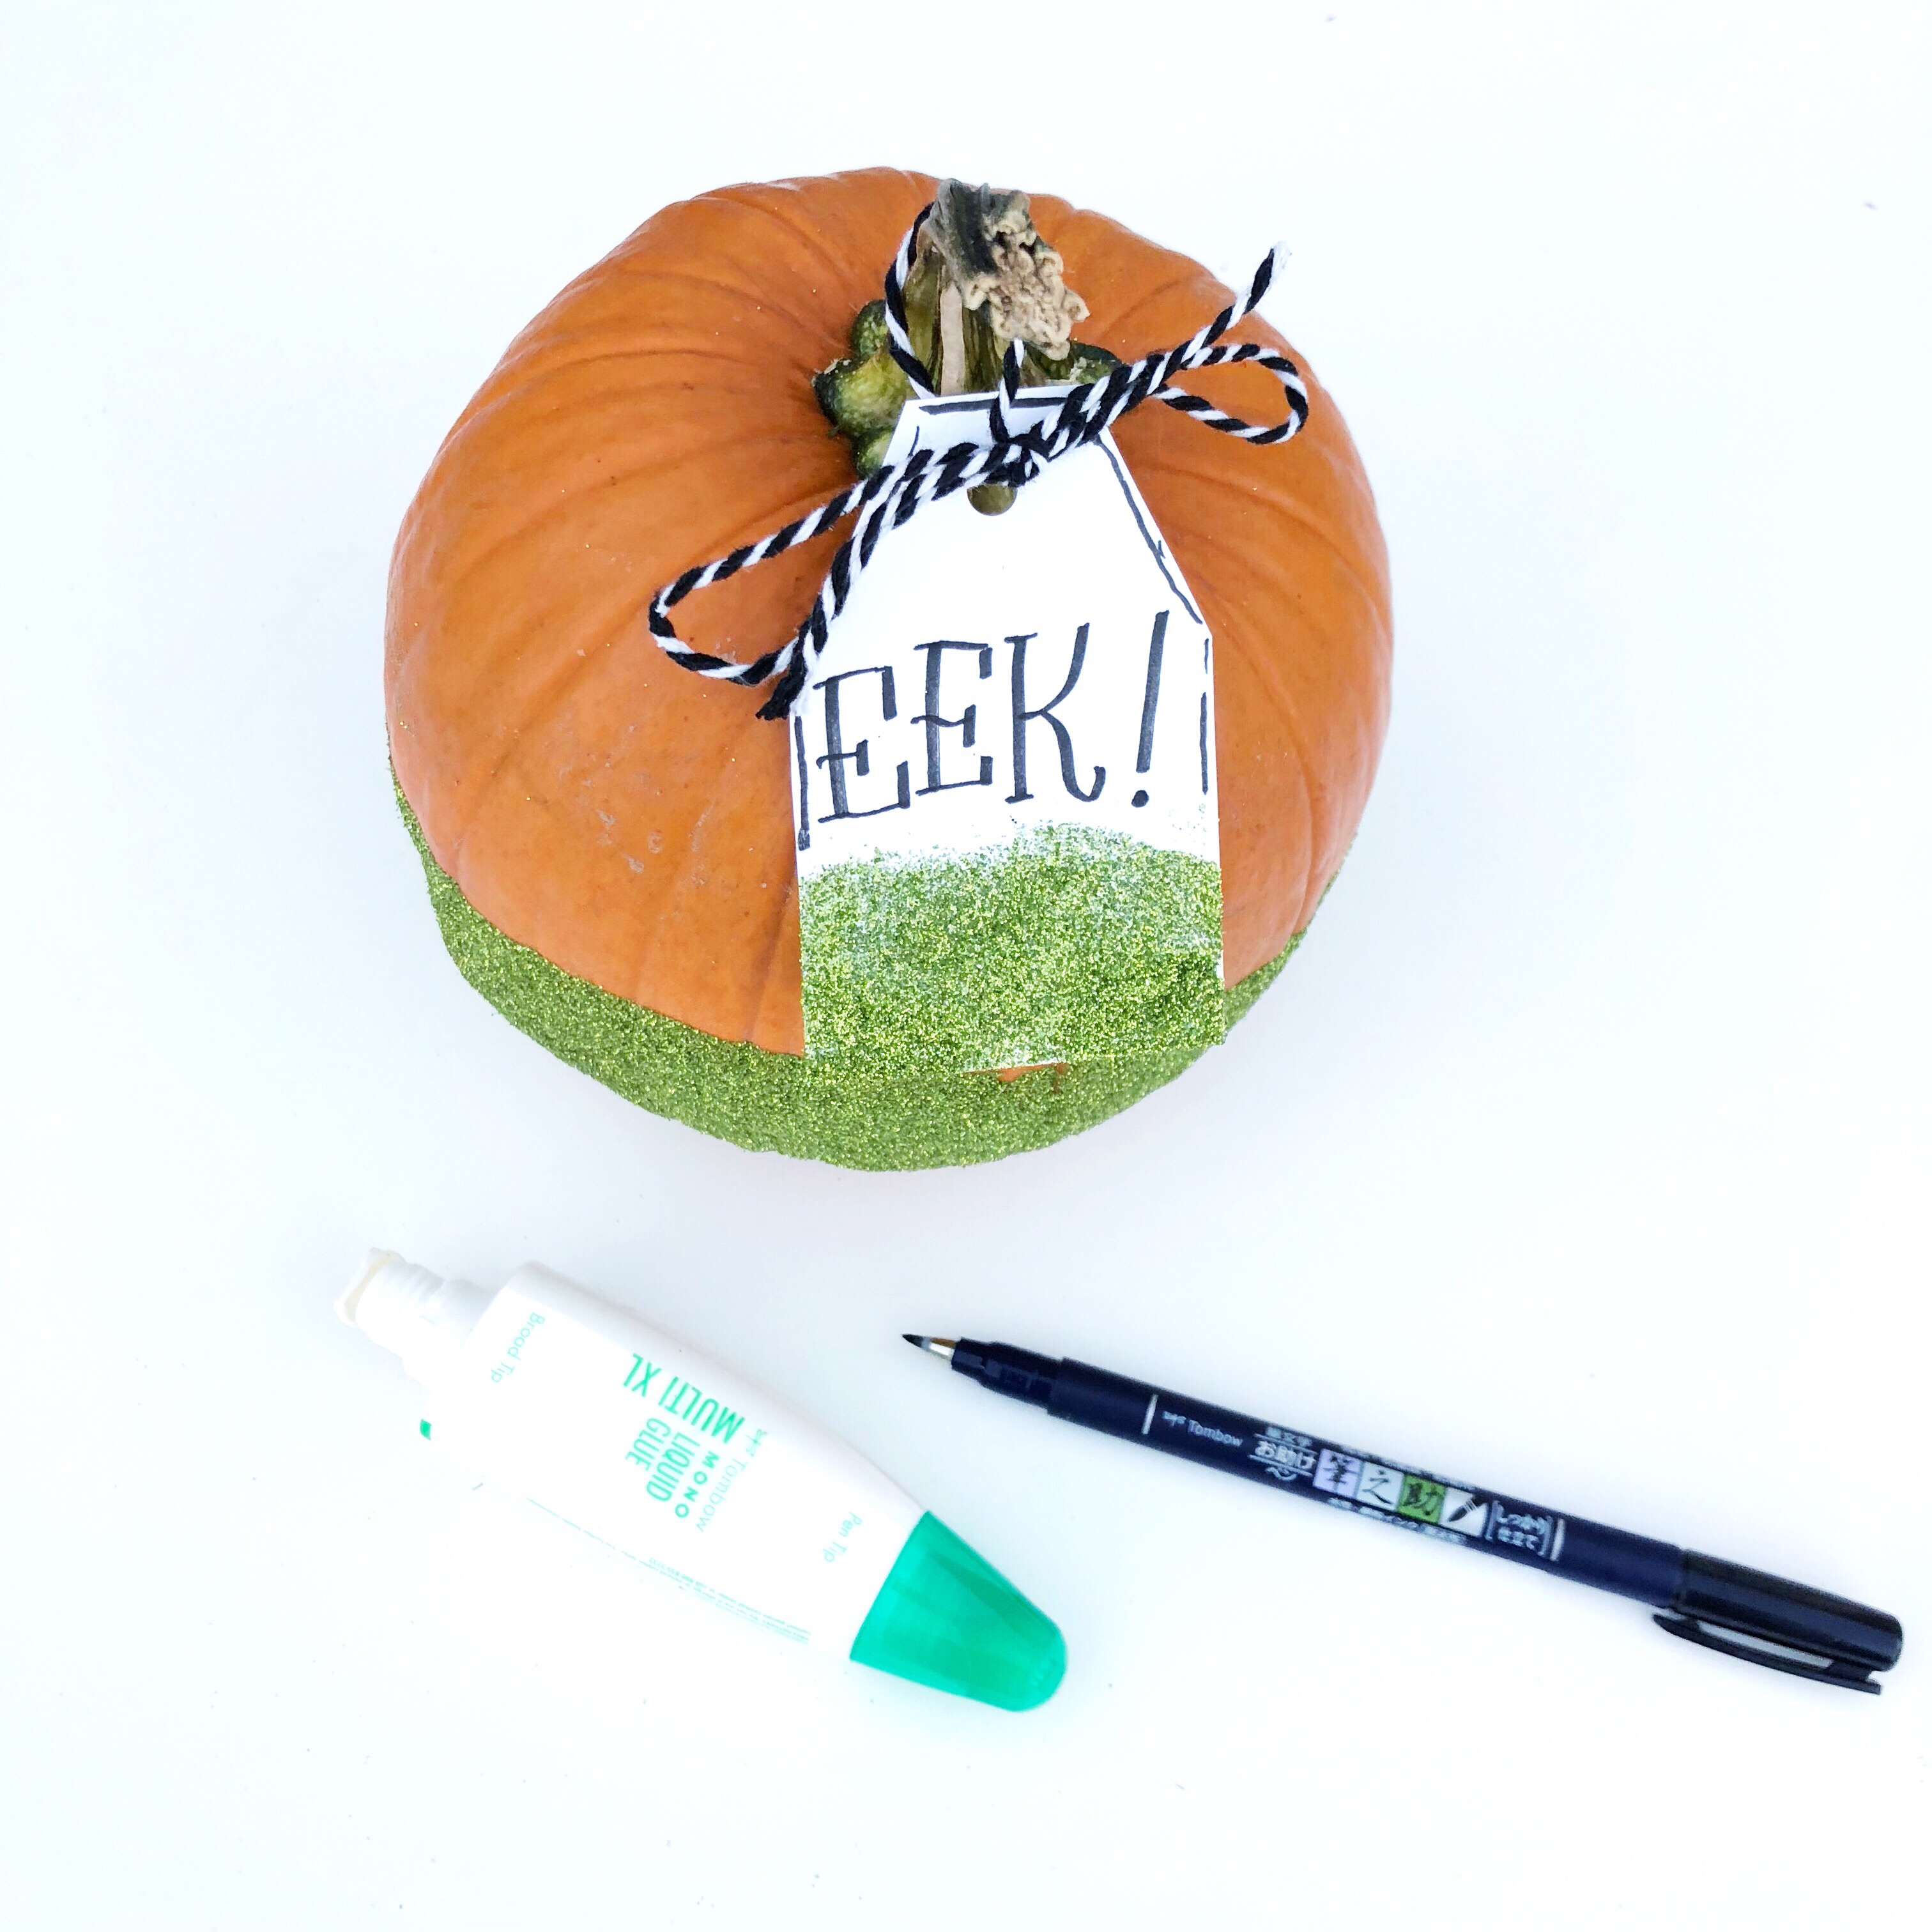 Lauren Fitzmaurice of Renmade Calligraphy shows you how to create spooky and sparkly pumpkins with Tombow USA Adhesives and lettering supplies.